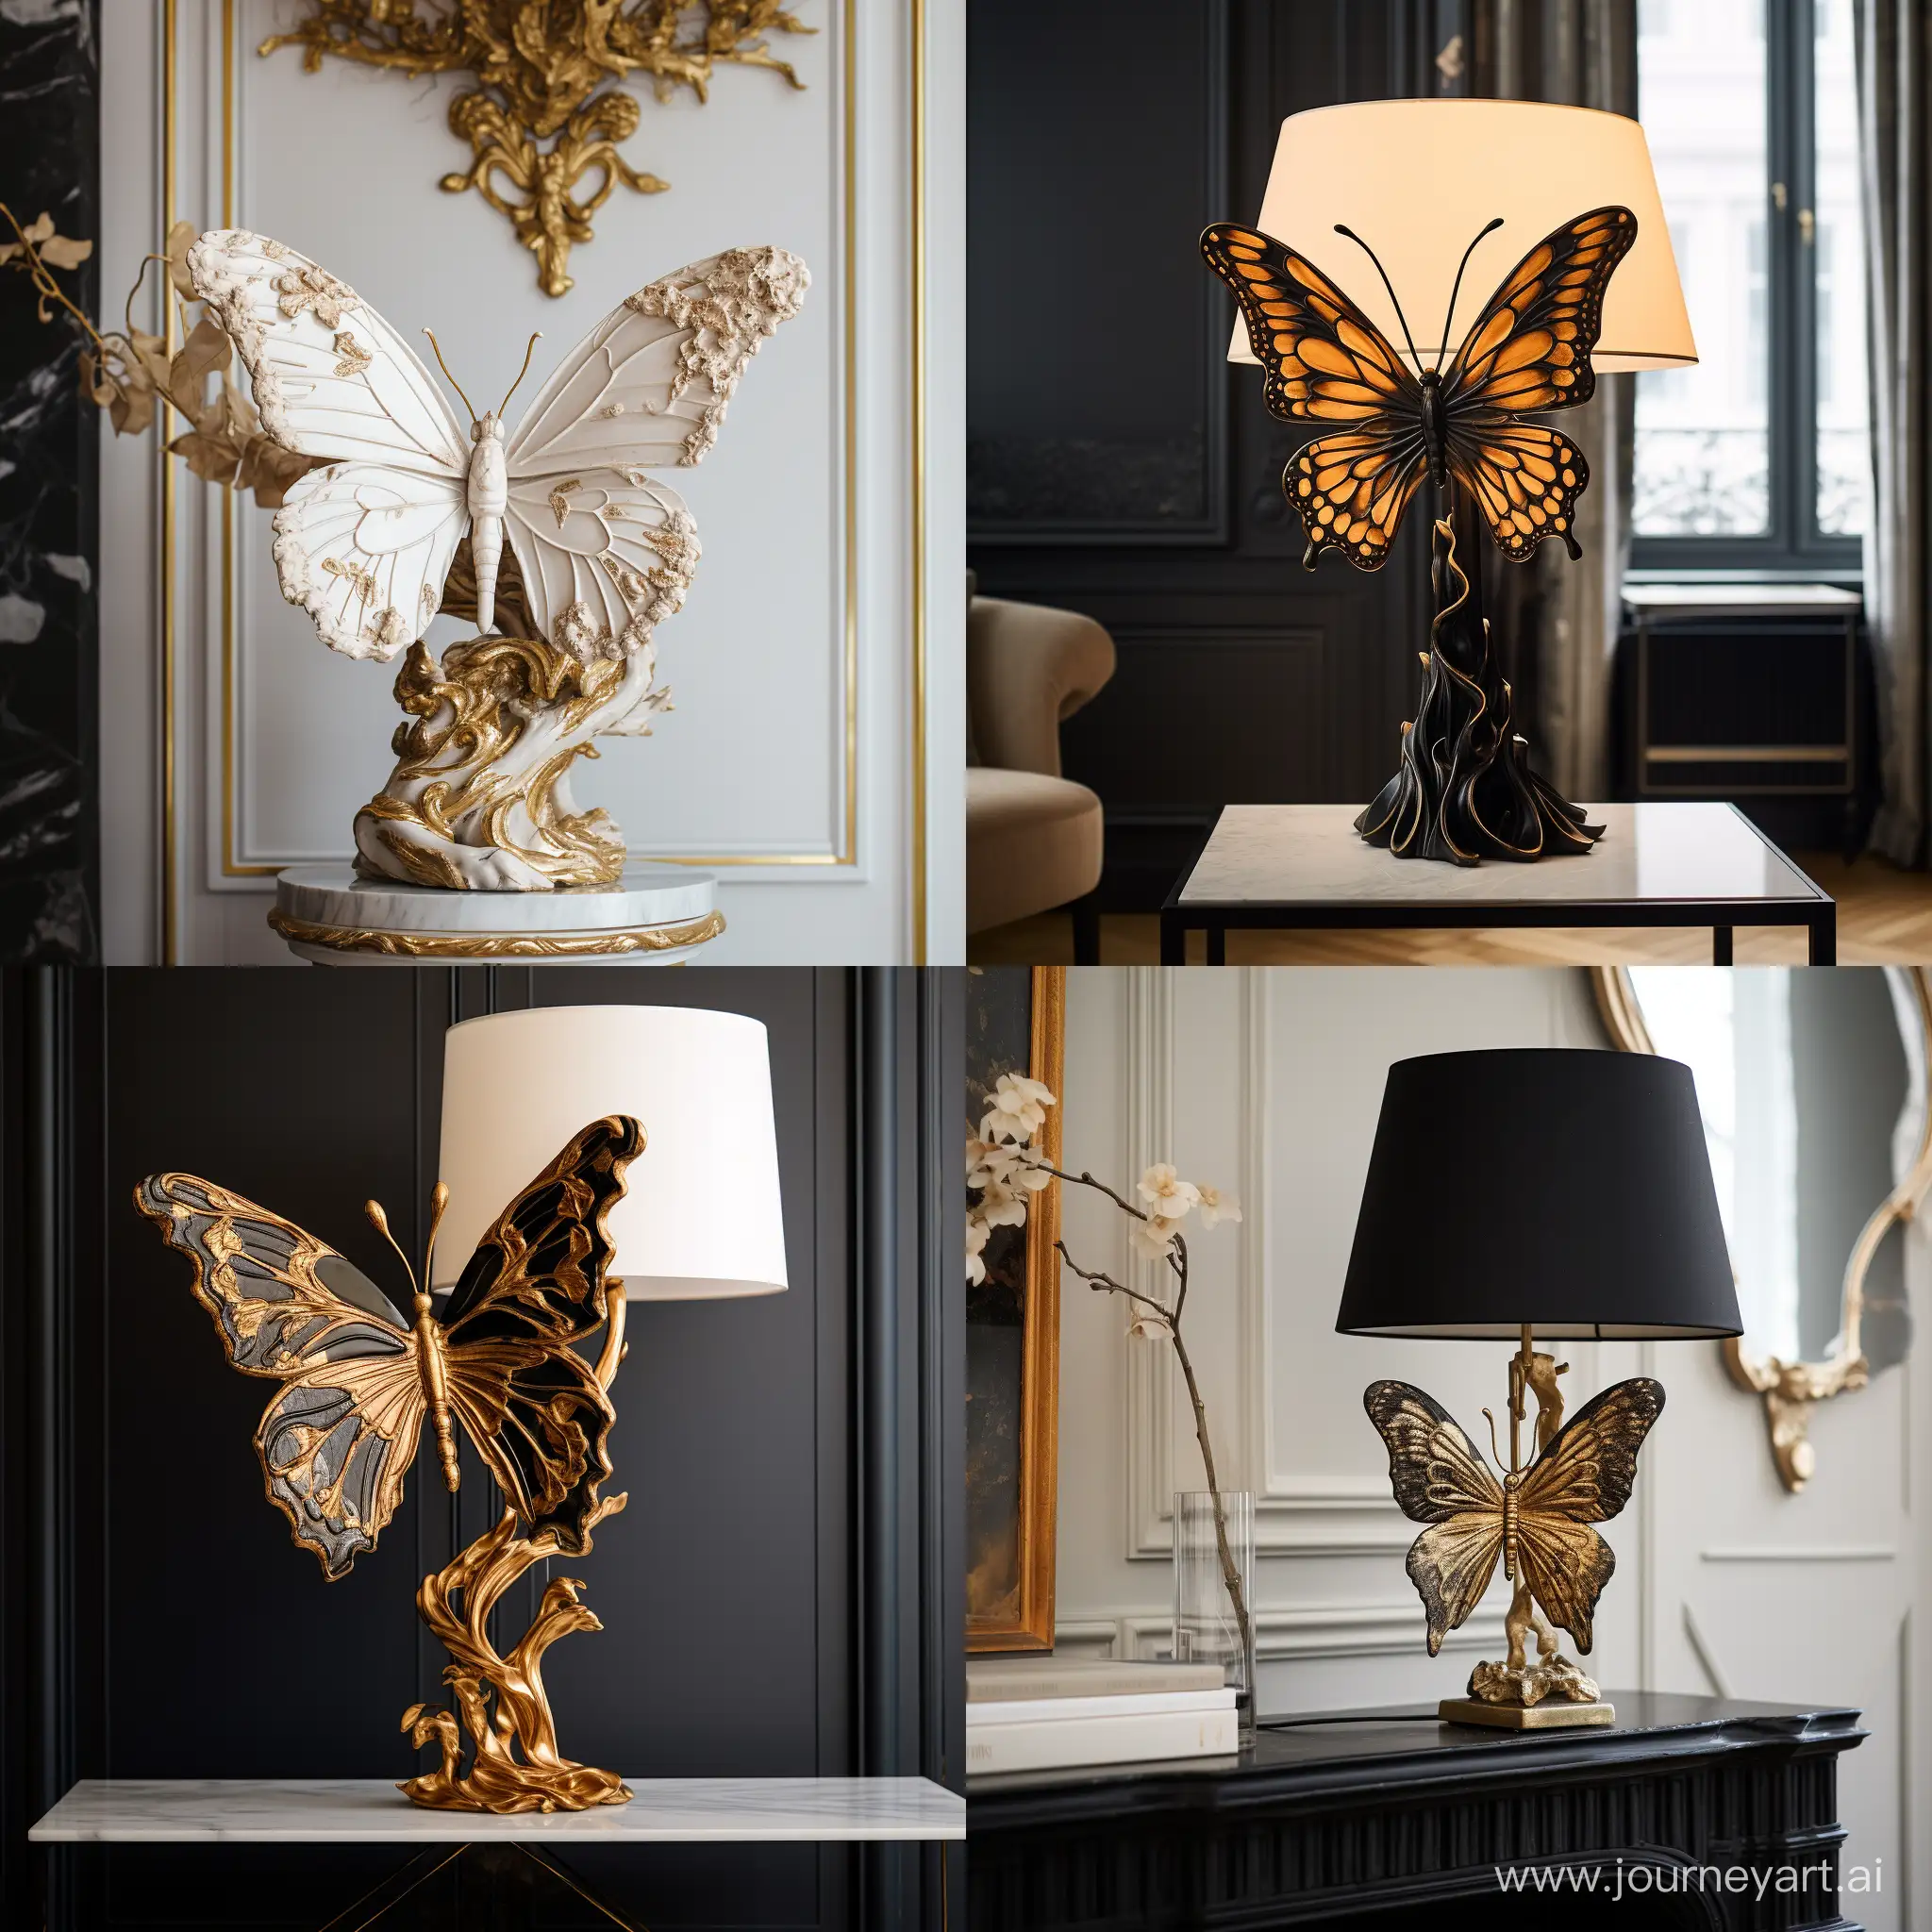 Exquisite-Butterfly-Sculpture-Rests-on-Elegant-EuropeanStyle-Lamp